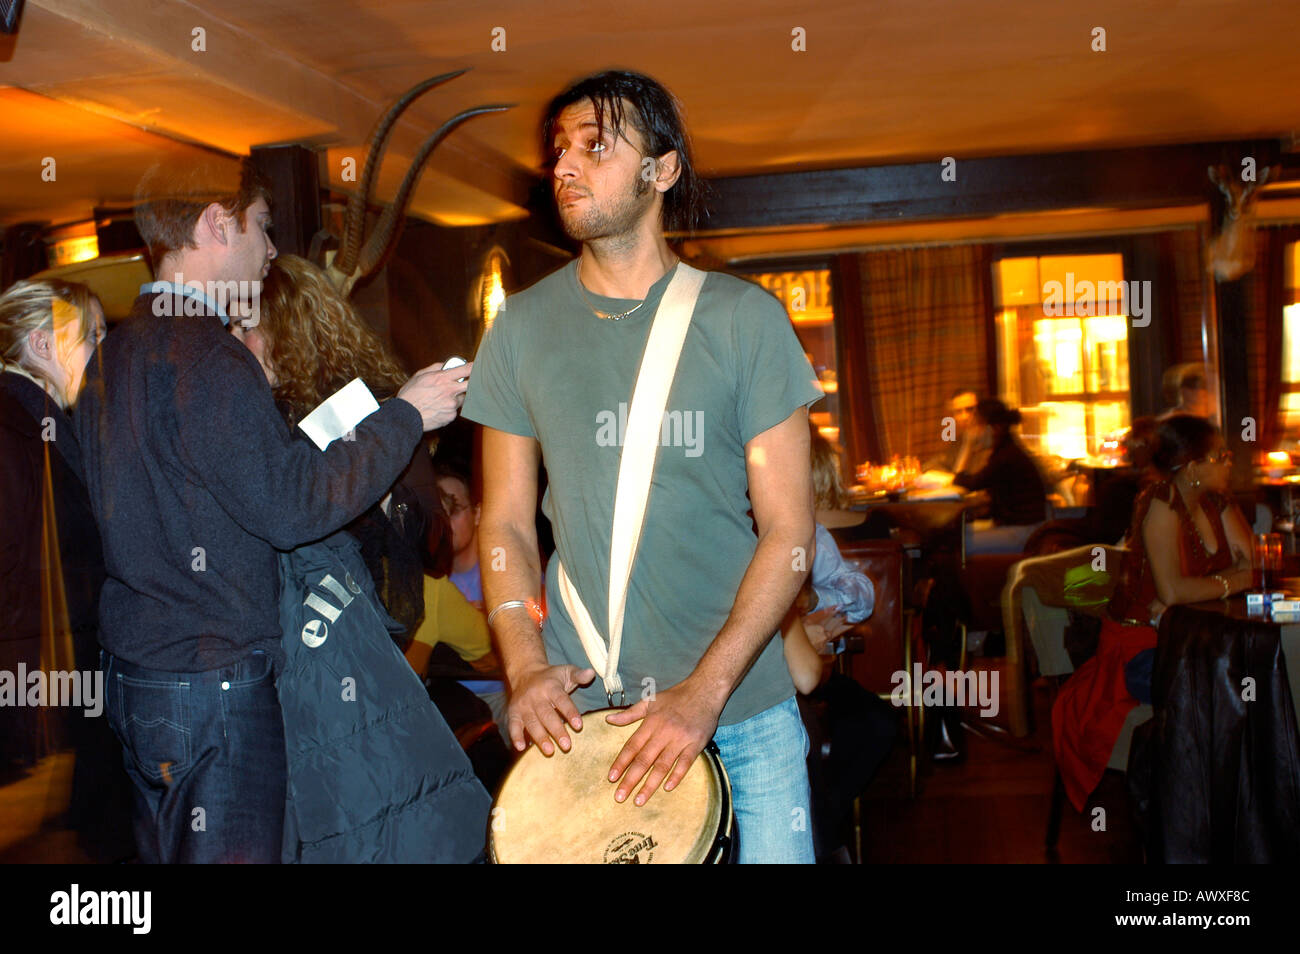 PARIS France, Teen Playing African Drum, Male Musician Drummer Playing in African Style Restaurant Bar 'L'Impala Lounge' working at night Stock Photo